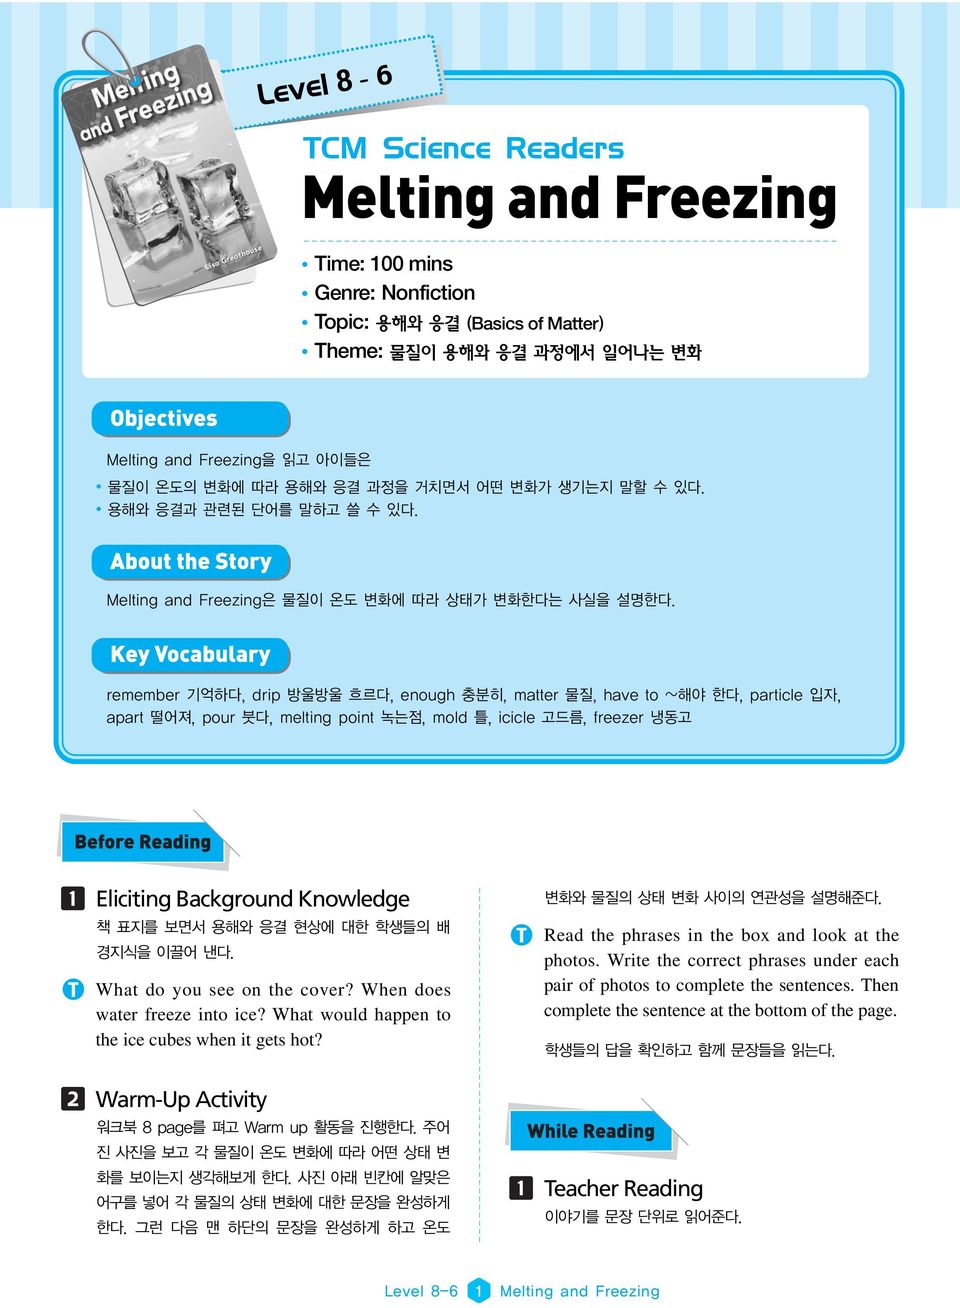 What would happen to the ice cubes when it gets hot? Warm-Up Activity Read the phrases in the box and look at the photos.